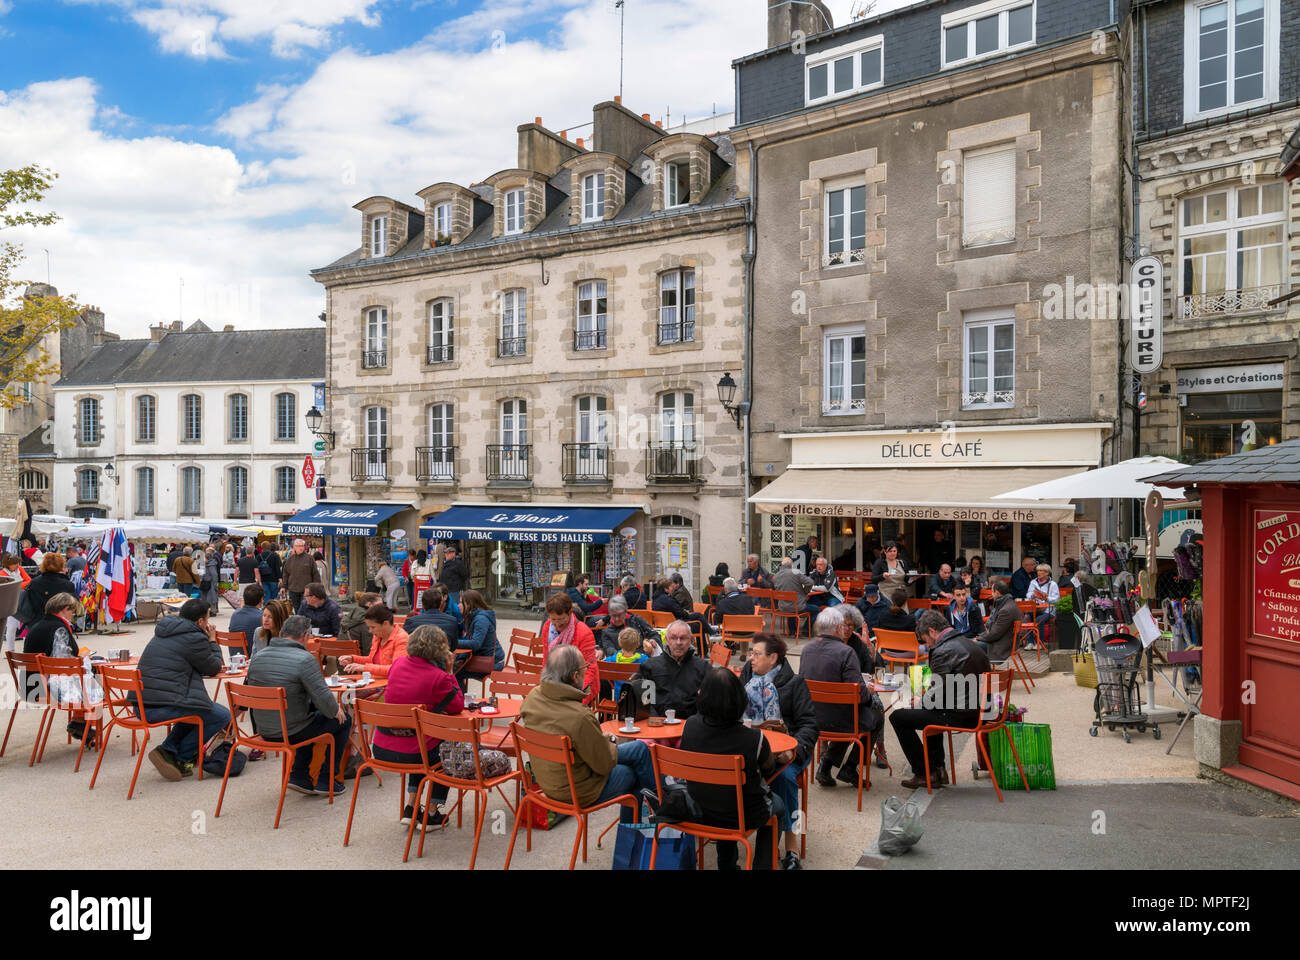 Cafe in the old town, Place des Lices, Vannes, Brittany, France Stock Photo